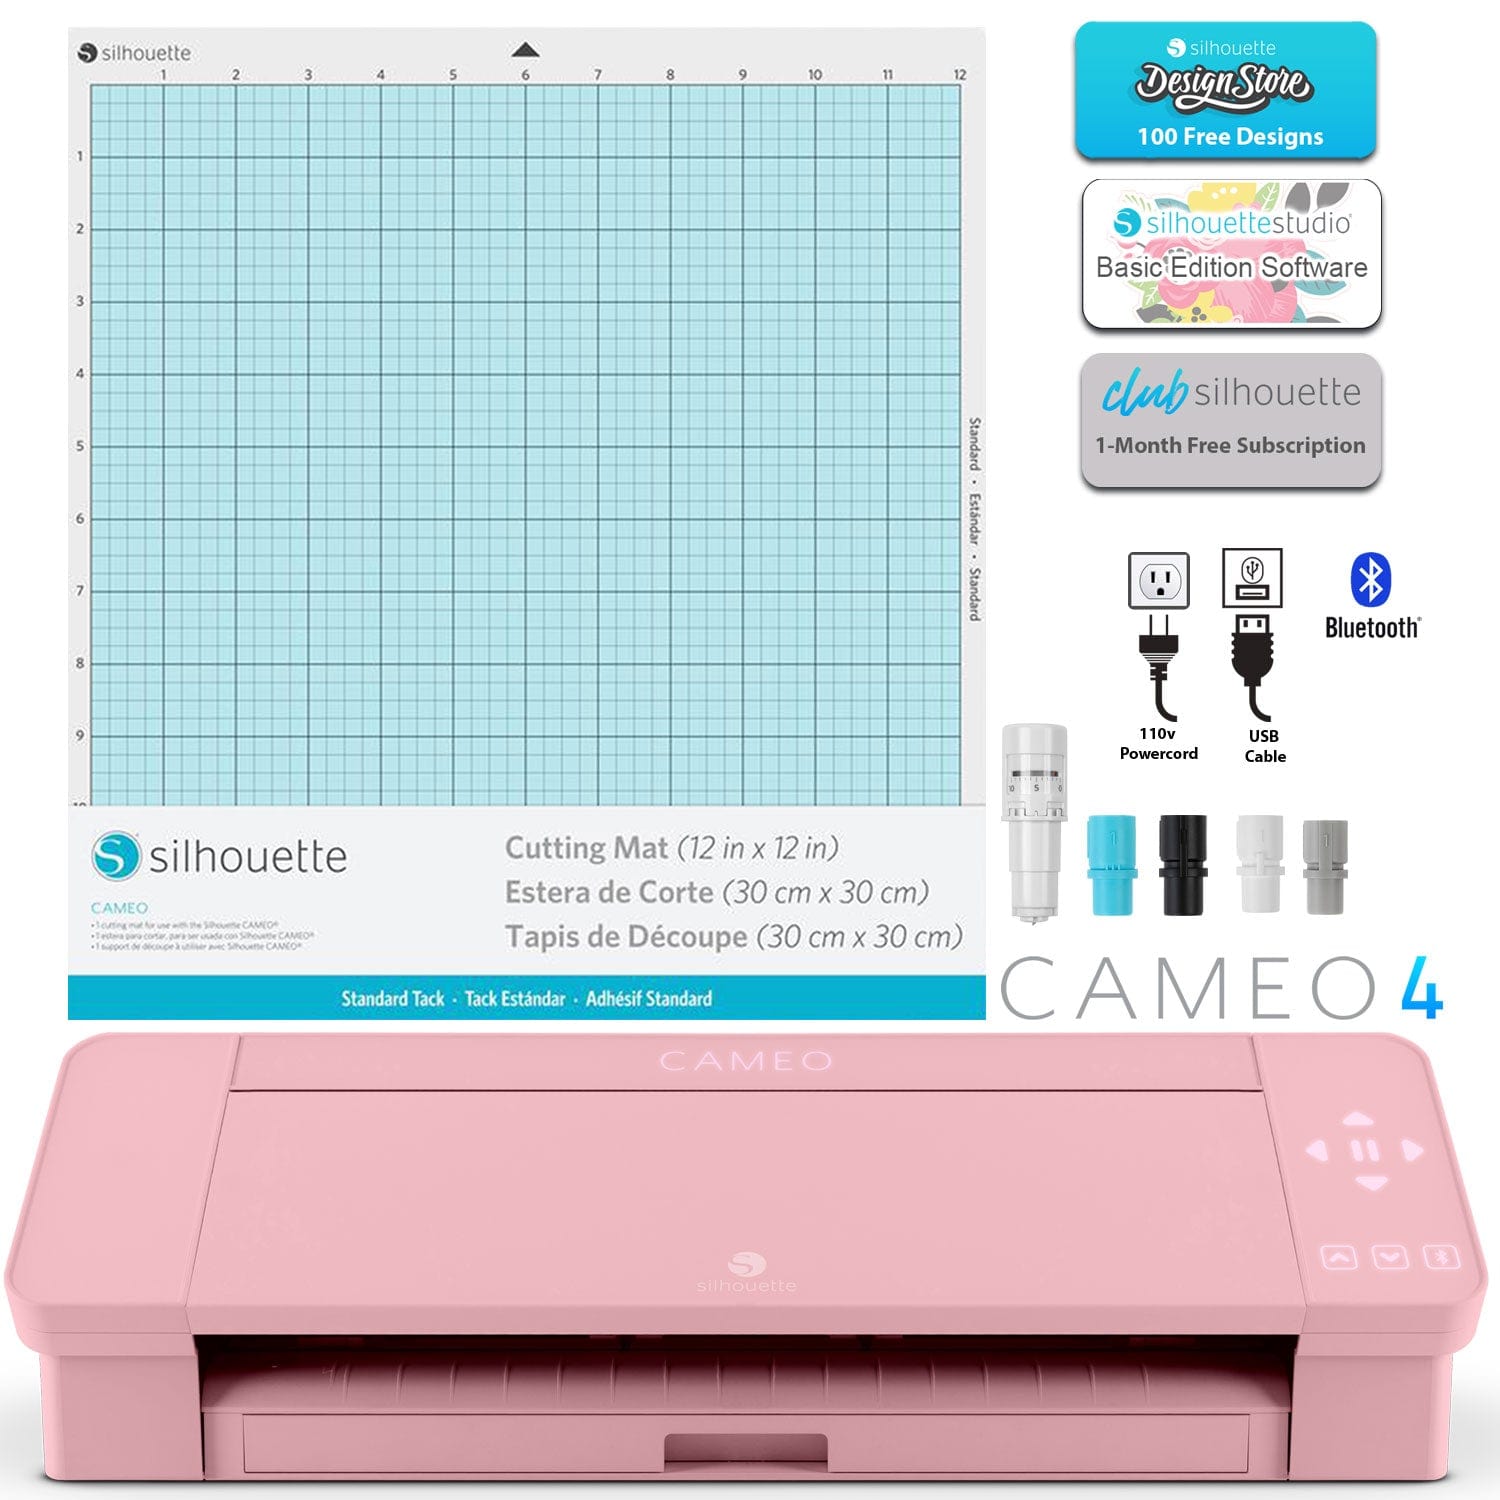 Silhouette America Craft Cutters Silhouette Cameo 4 Pink Bundle with Vinyl Starter Kit, Heat Transfer Starter Kit,  24 Pack of Pens, Vinyl Tool Kit, 13 Ebooks, classes, and more